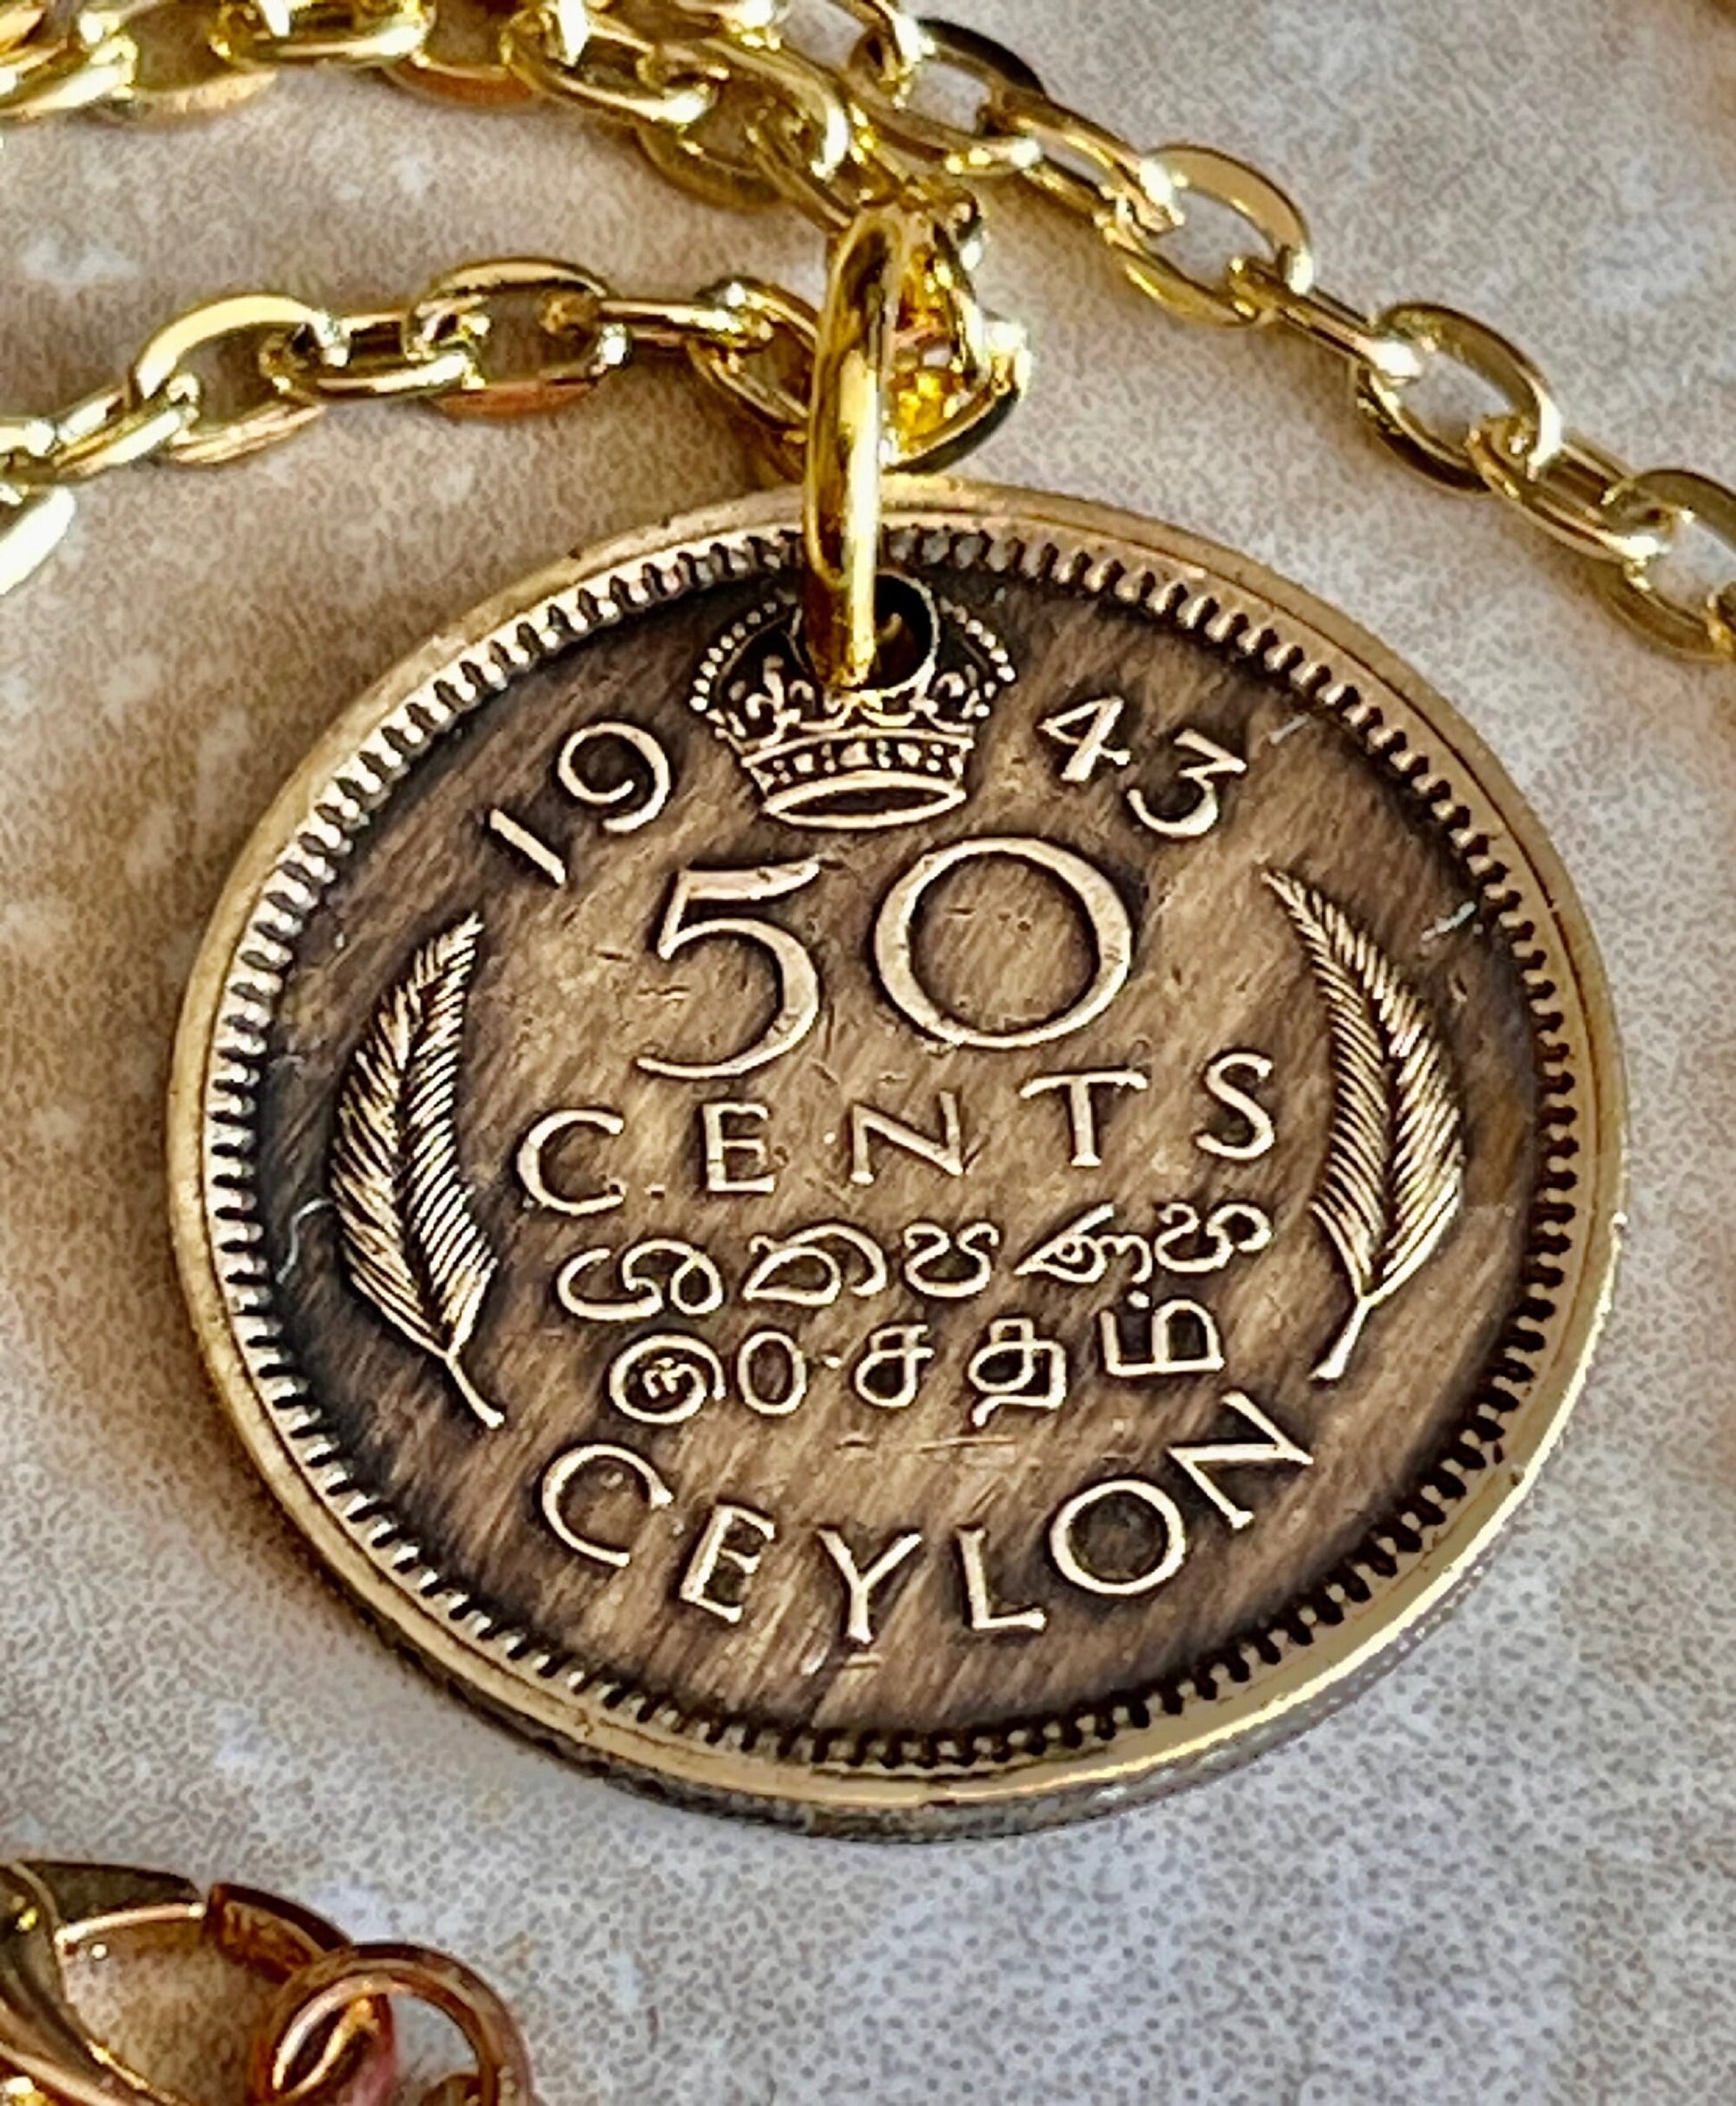 Ceylon Coin Necklace 50 Cents Pendant Handmade Custom Made Charm Gift For Friend Coin Charm Gift For Him, Coin Collector, World Coins